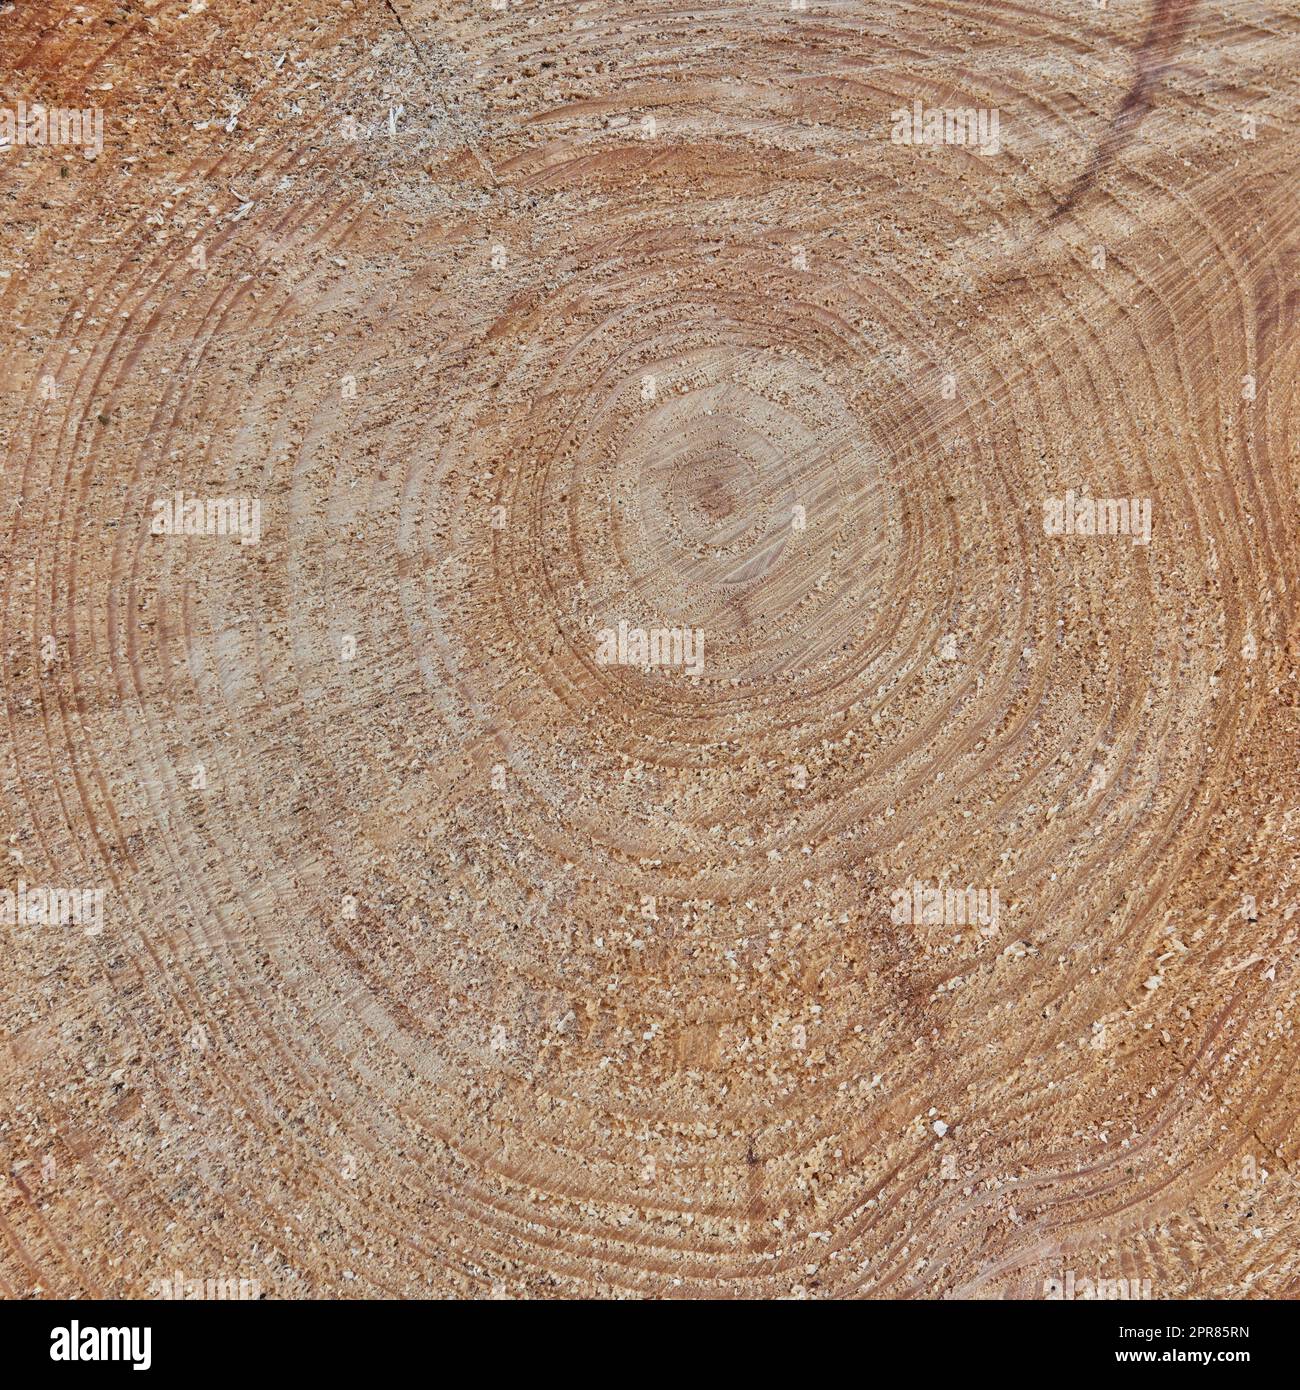 Raw texture of freshly cut tree trunk. Wooden detail of rough textures on a used tree trunk. Wooden material with carving marks. Circular patterns on organic surface from nature Stock Photo